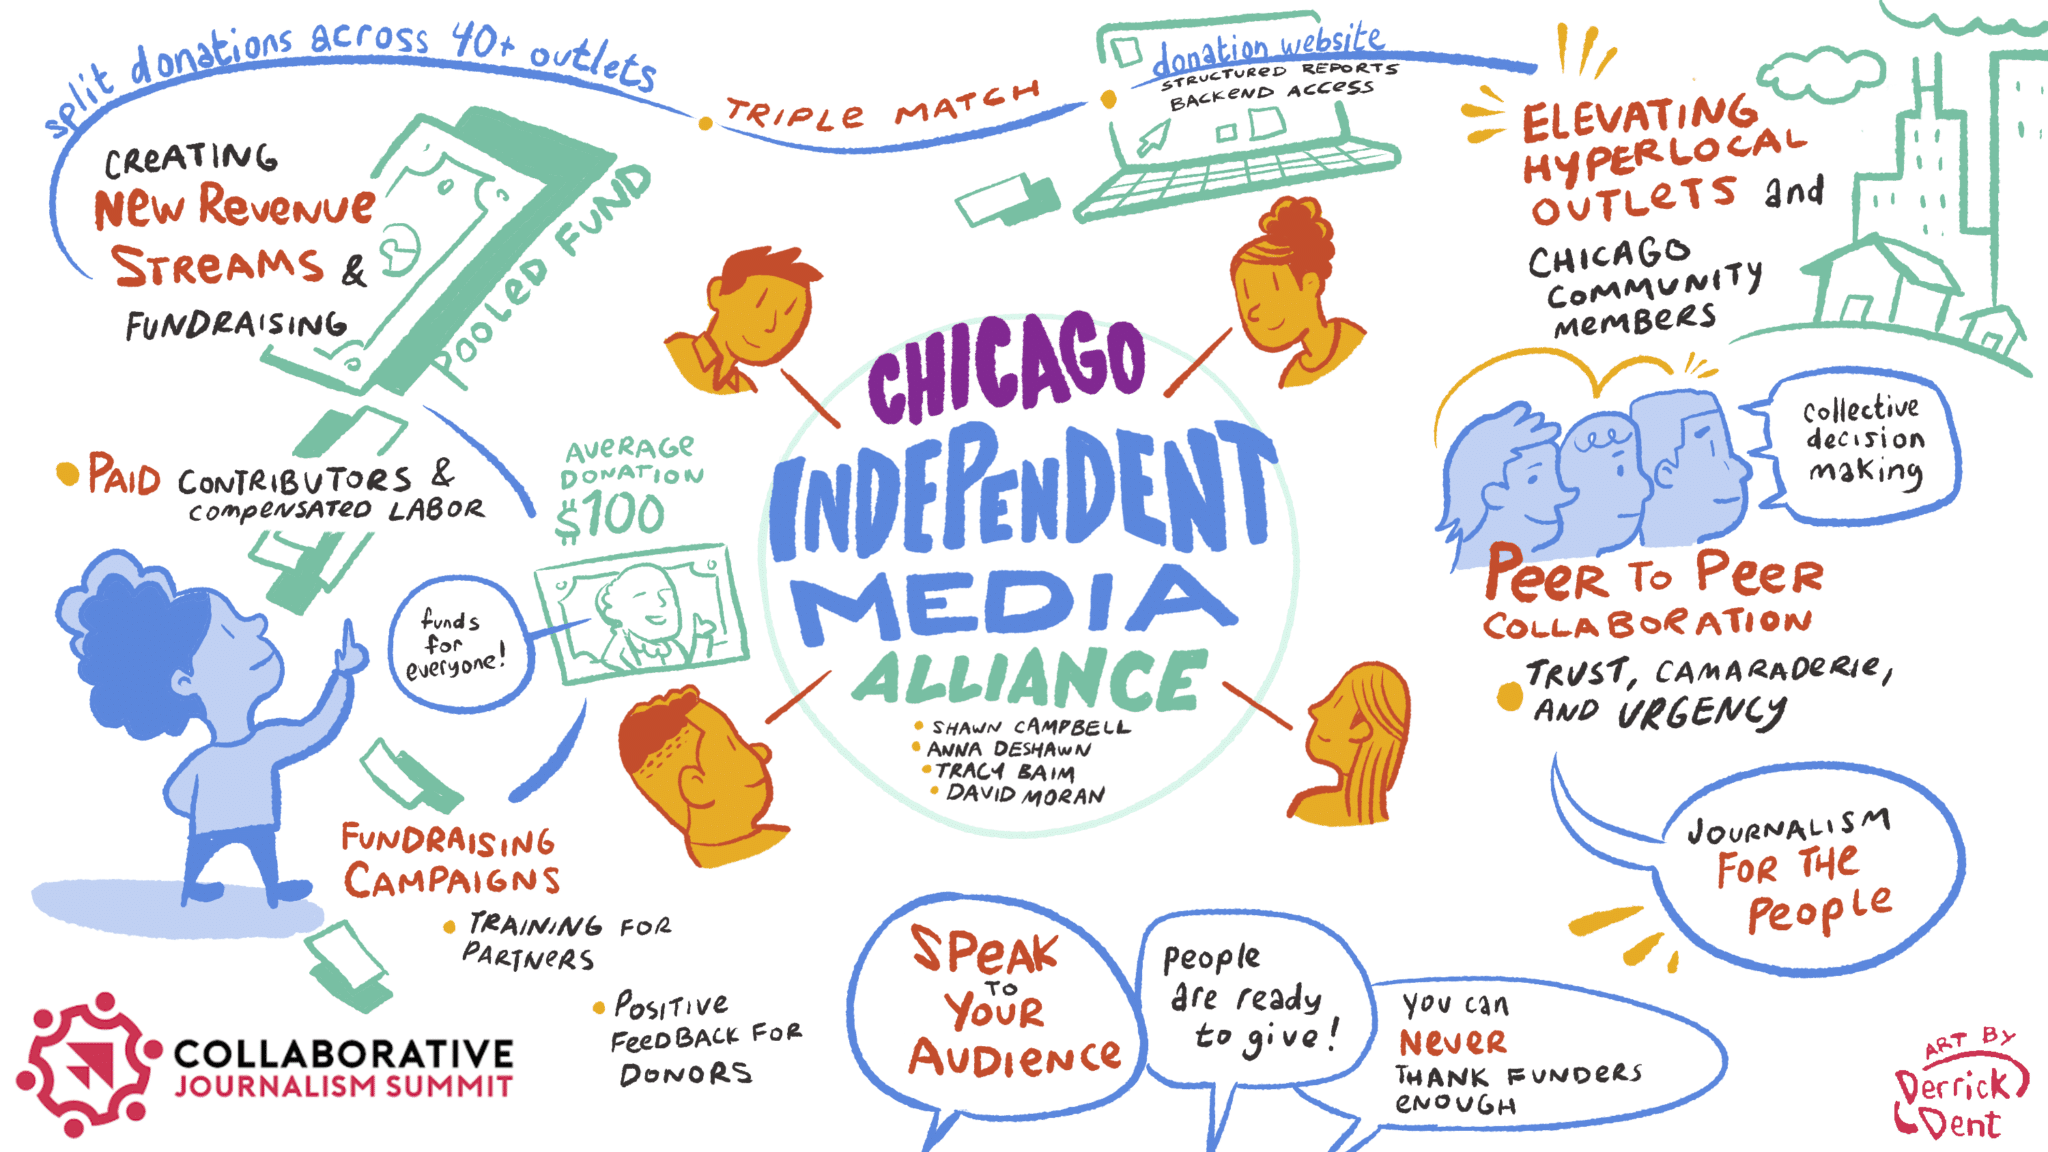 A graphic illustration from a panel discussion on collaborative journalism about the Chicago Independent Media Alliance features cartoon drawings of people working together surrounding by relevant words and concepts from the panel discussion.